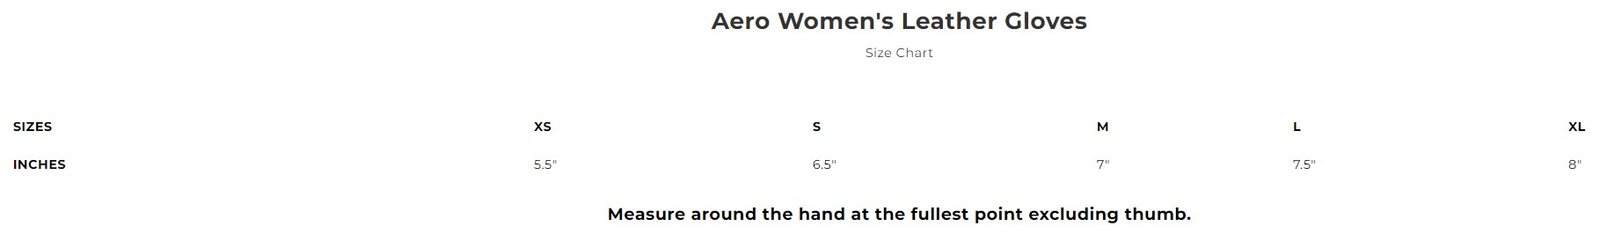 Size chart for Aero women's leather gauntlet motorcycle gloves.